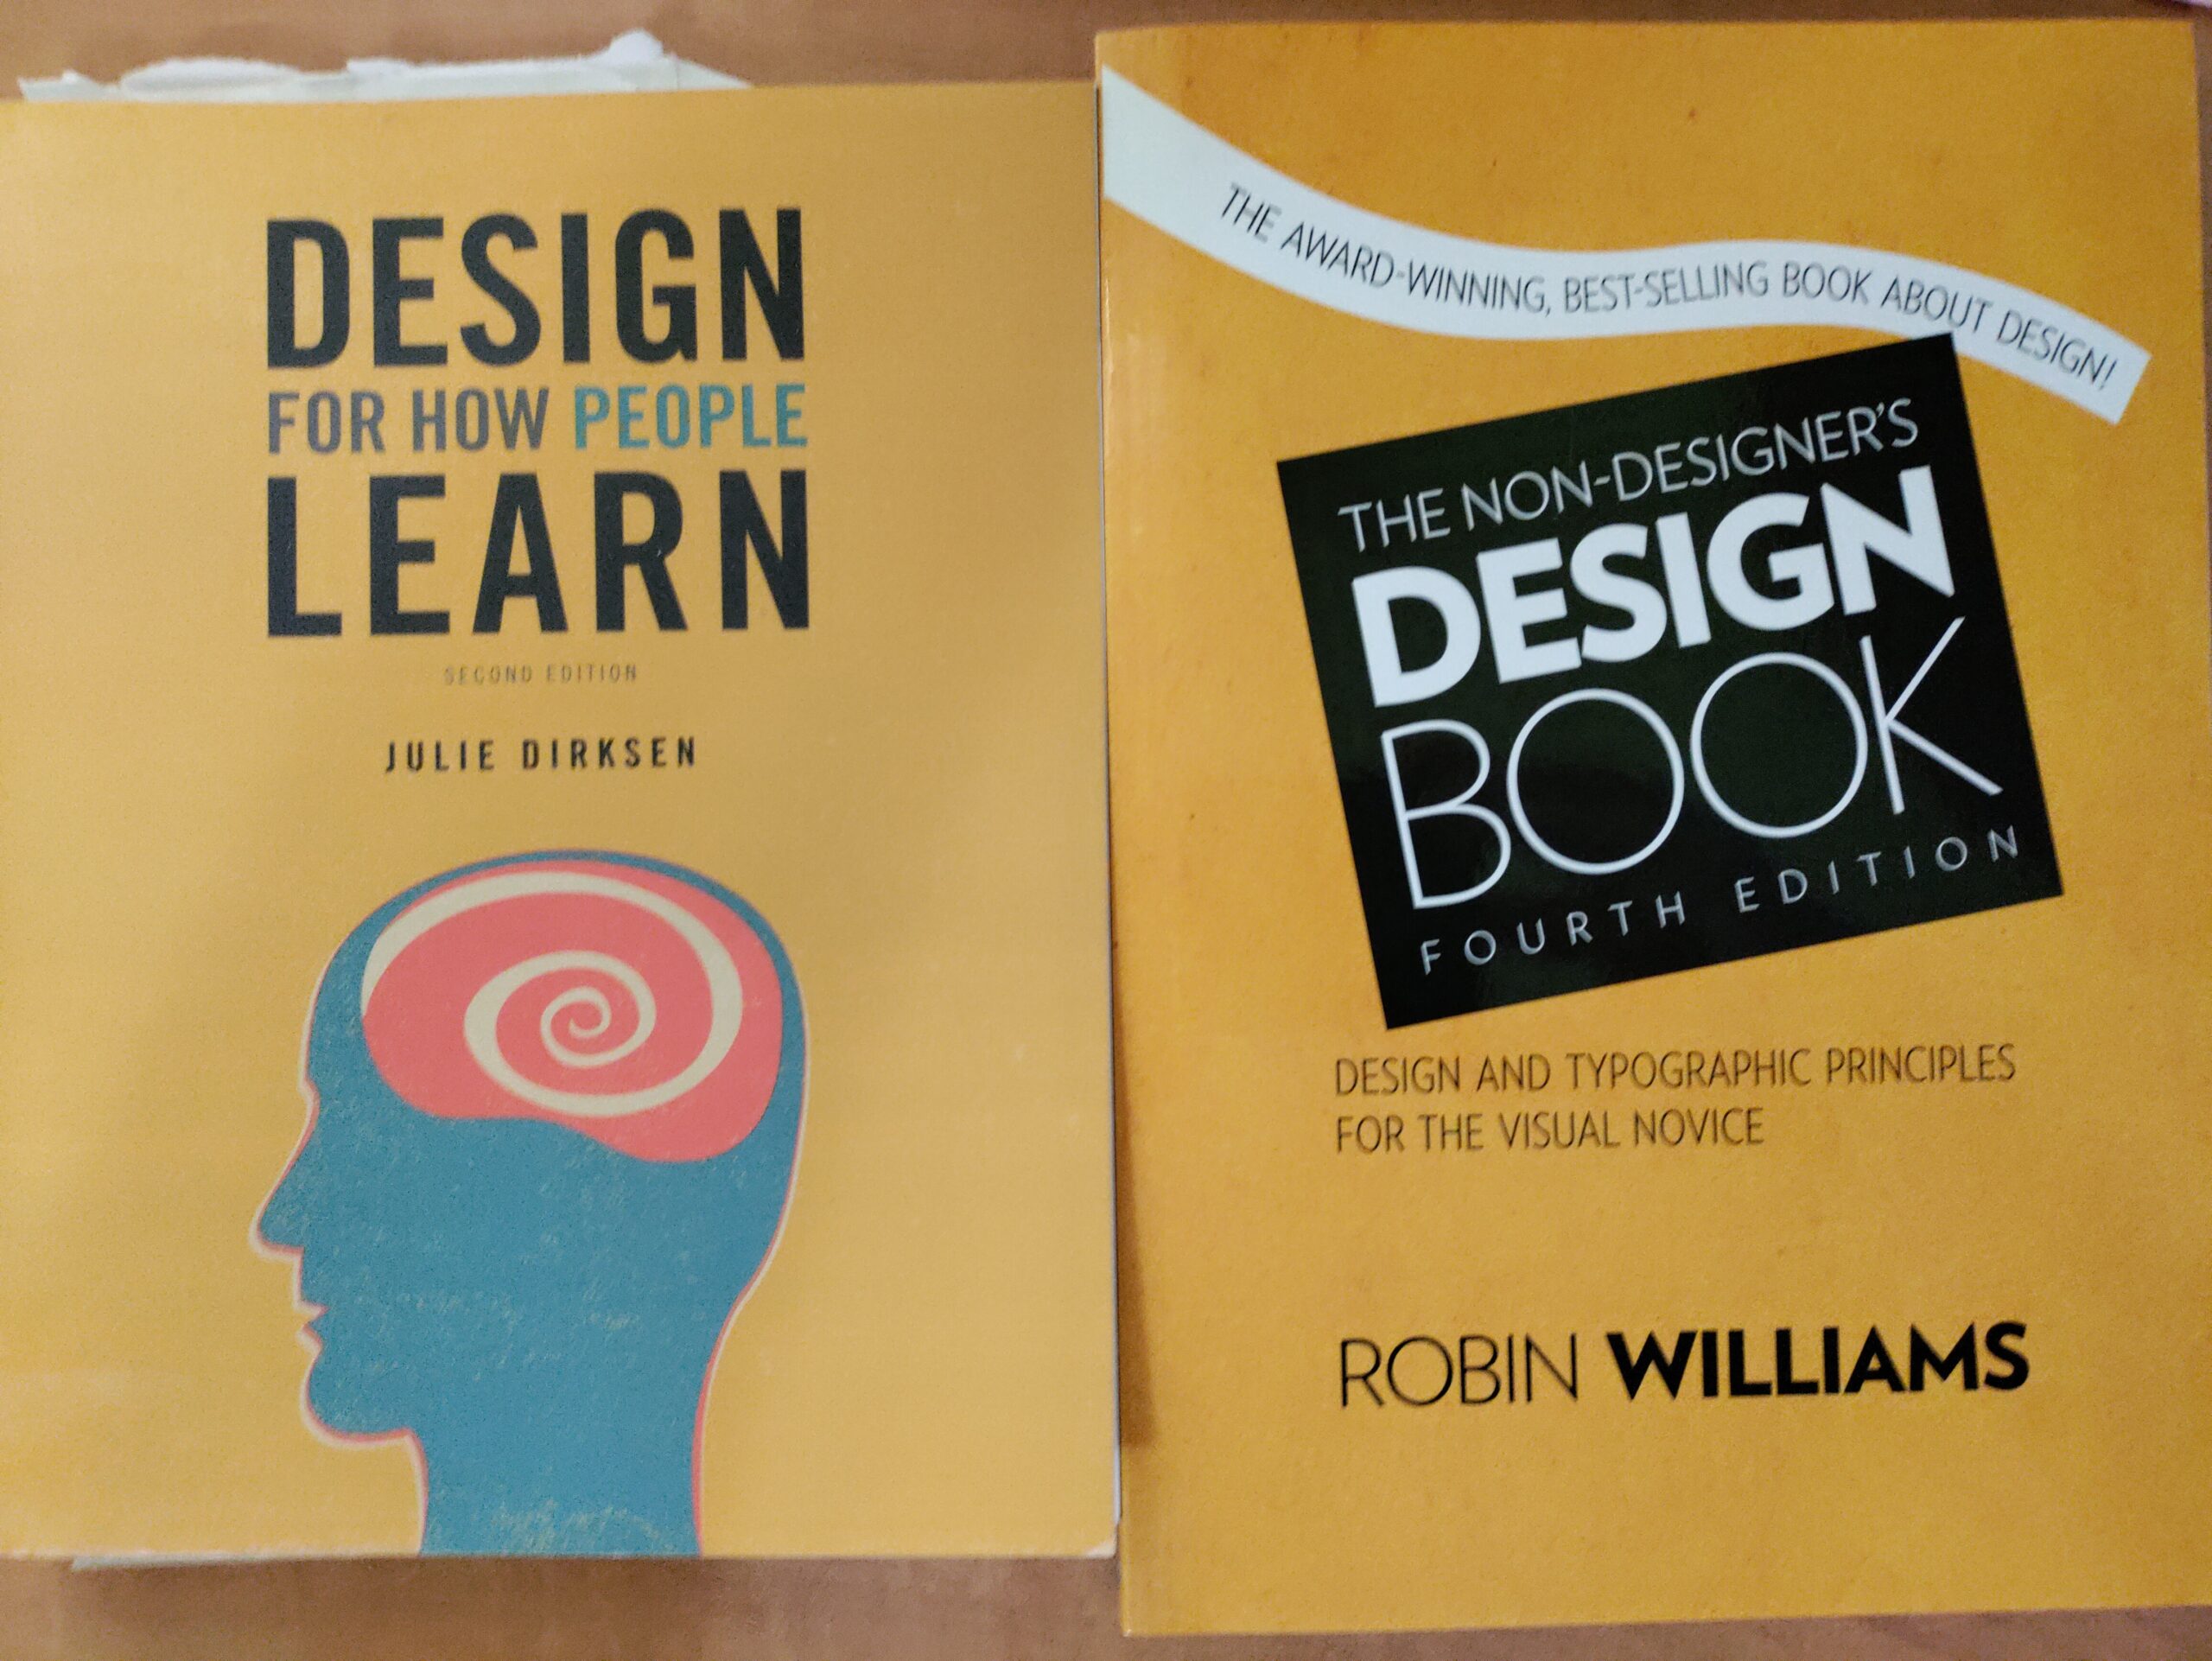 covers of two books: Design for how people learn and The non-designer's design book.